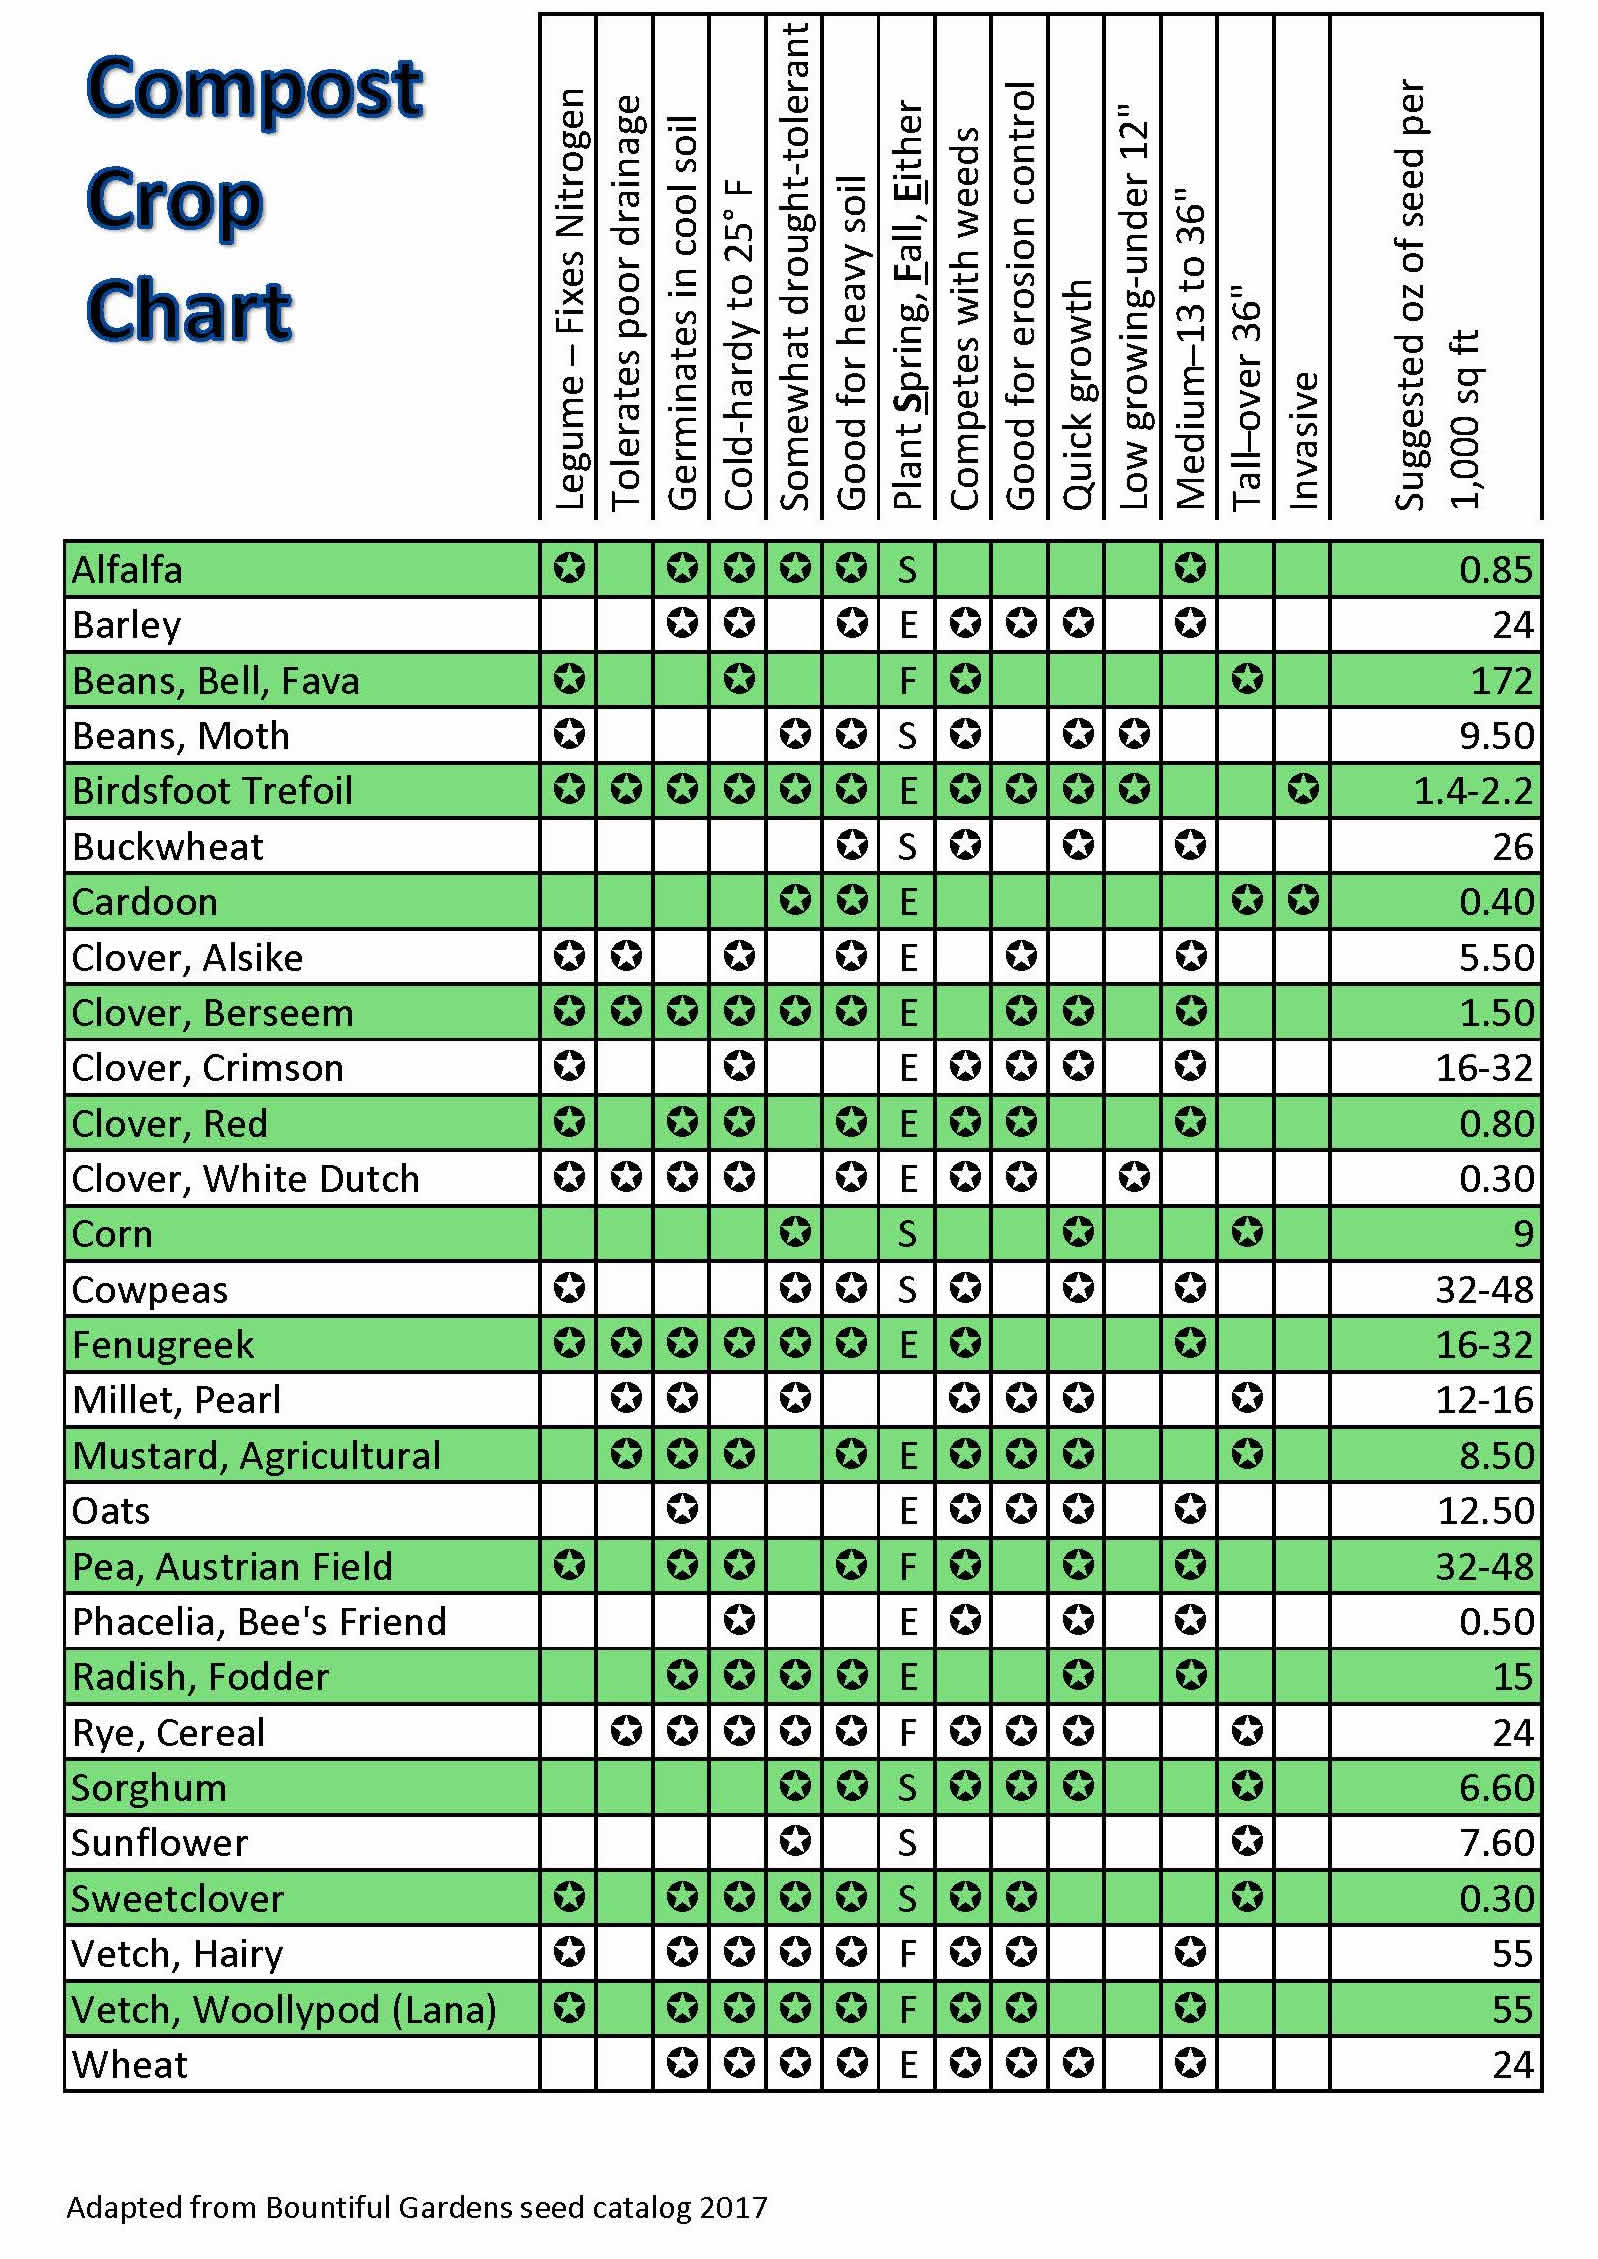 Cover Crop Chart - Comparing 